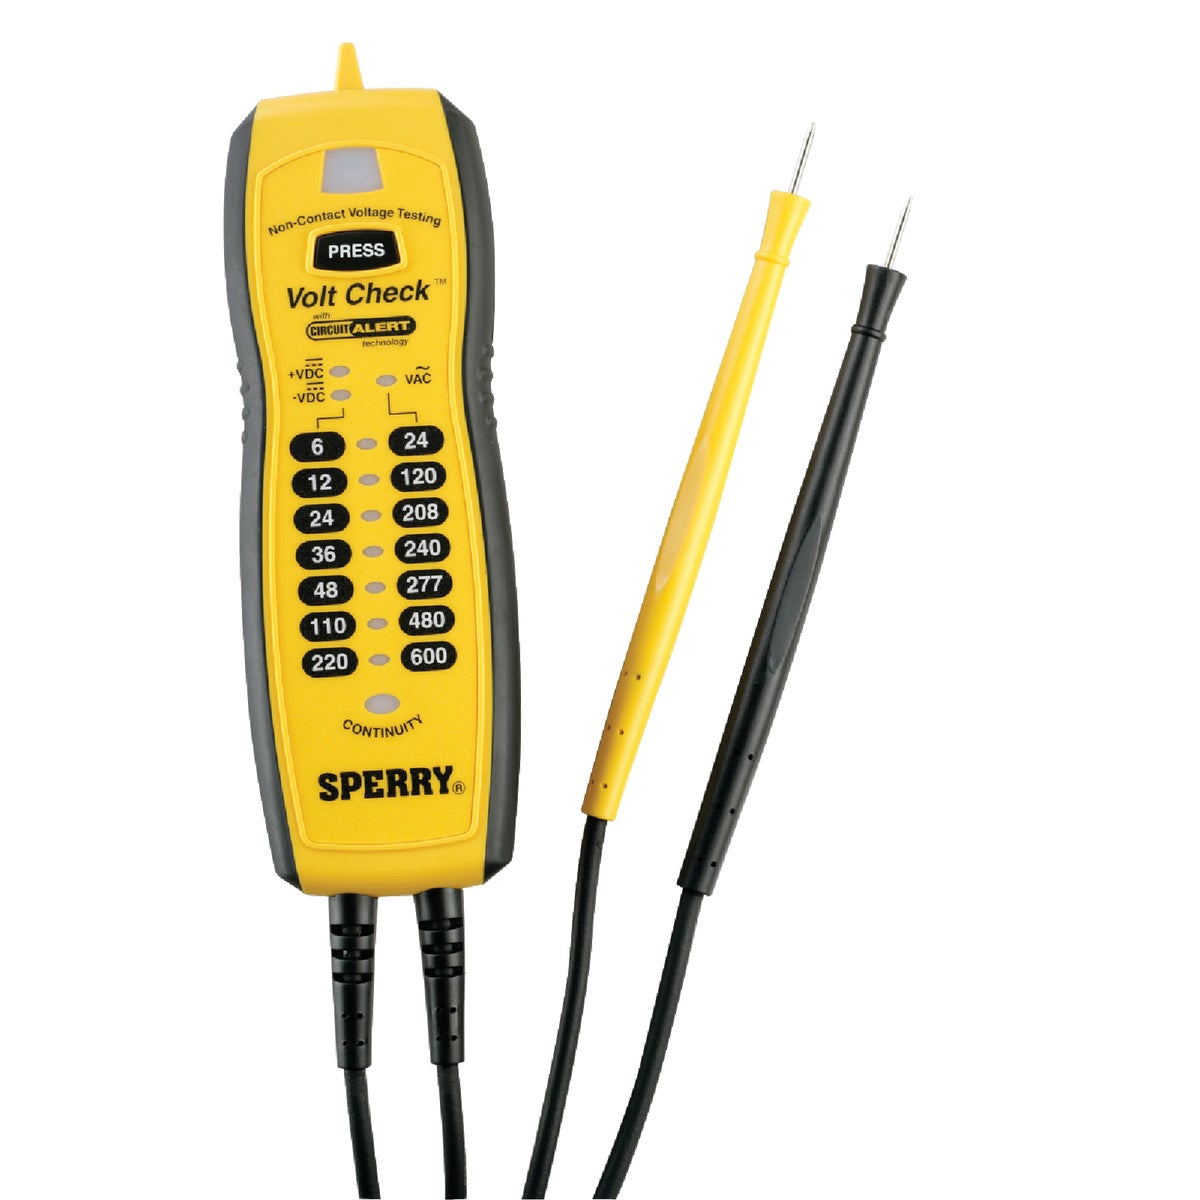 Item 514143, Multi-function tool indicates voltage level, tests continuity and includes 